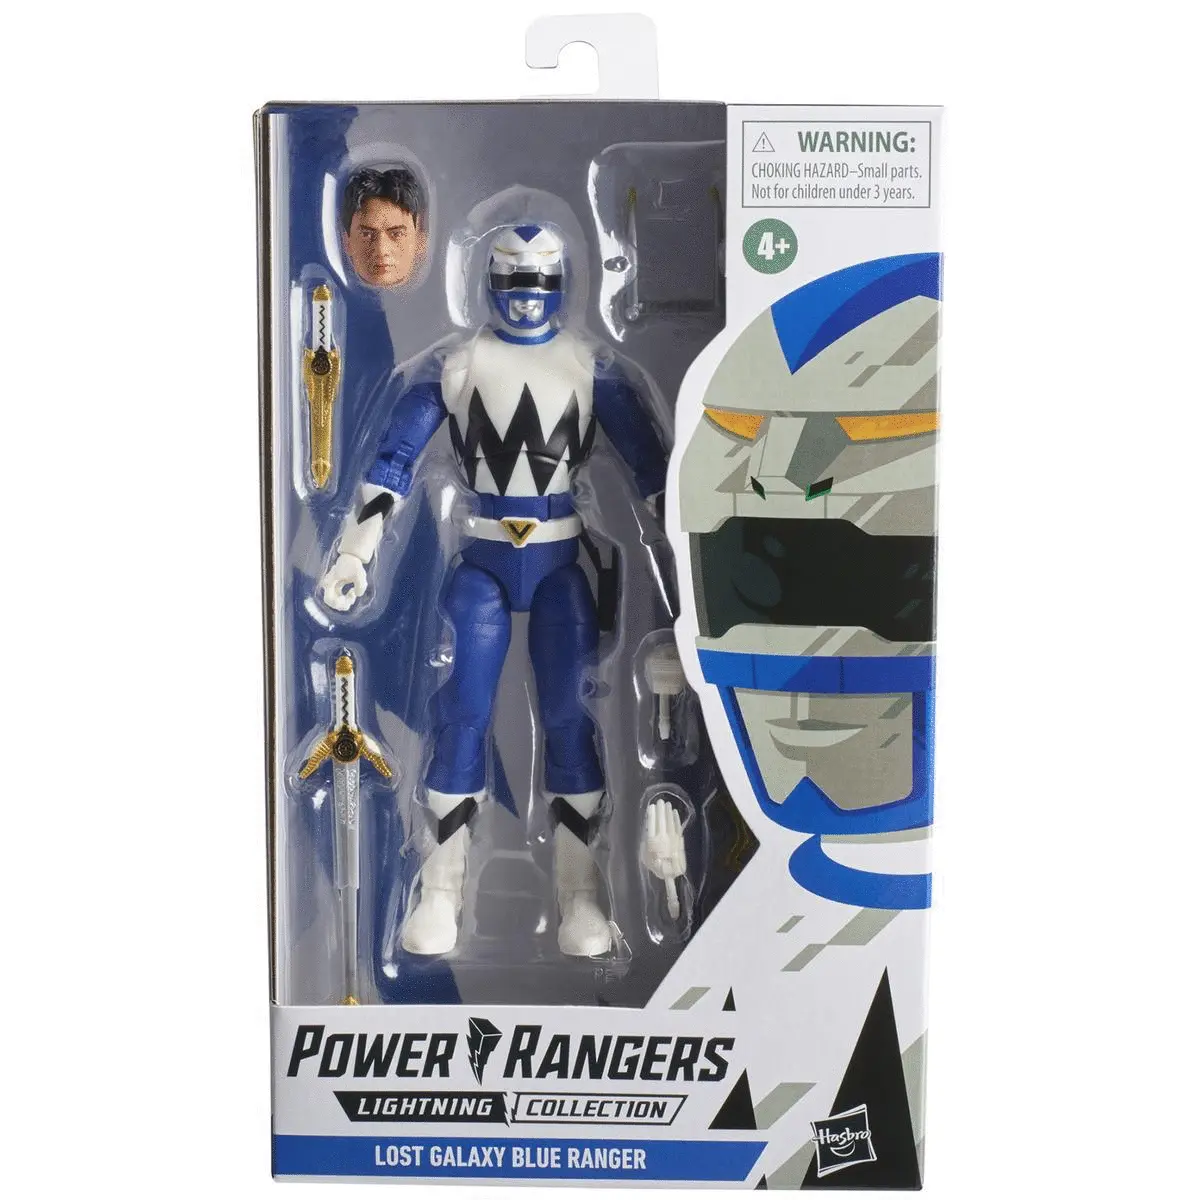 Gif showing the Blue Ranger from multiple angles